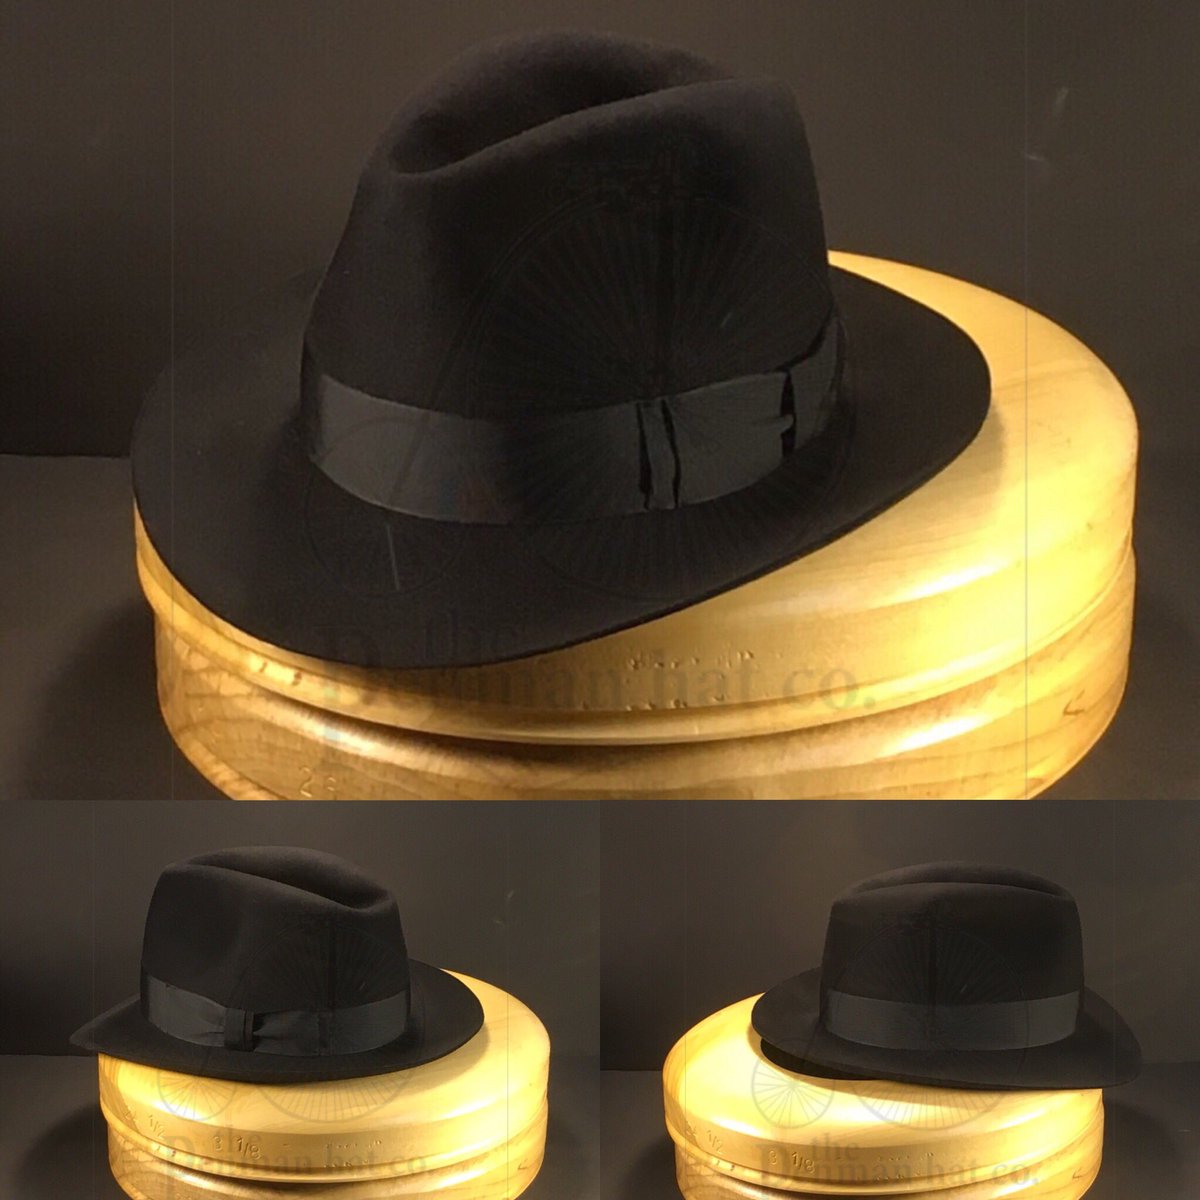 Are you ready for the new season of #nbctheblacklist (staring #jamesspader aka #raymondreddington)? I know I am, specially since I just finished another Blacklist hat #OnlyPenman #penmanhats and so can you.